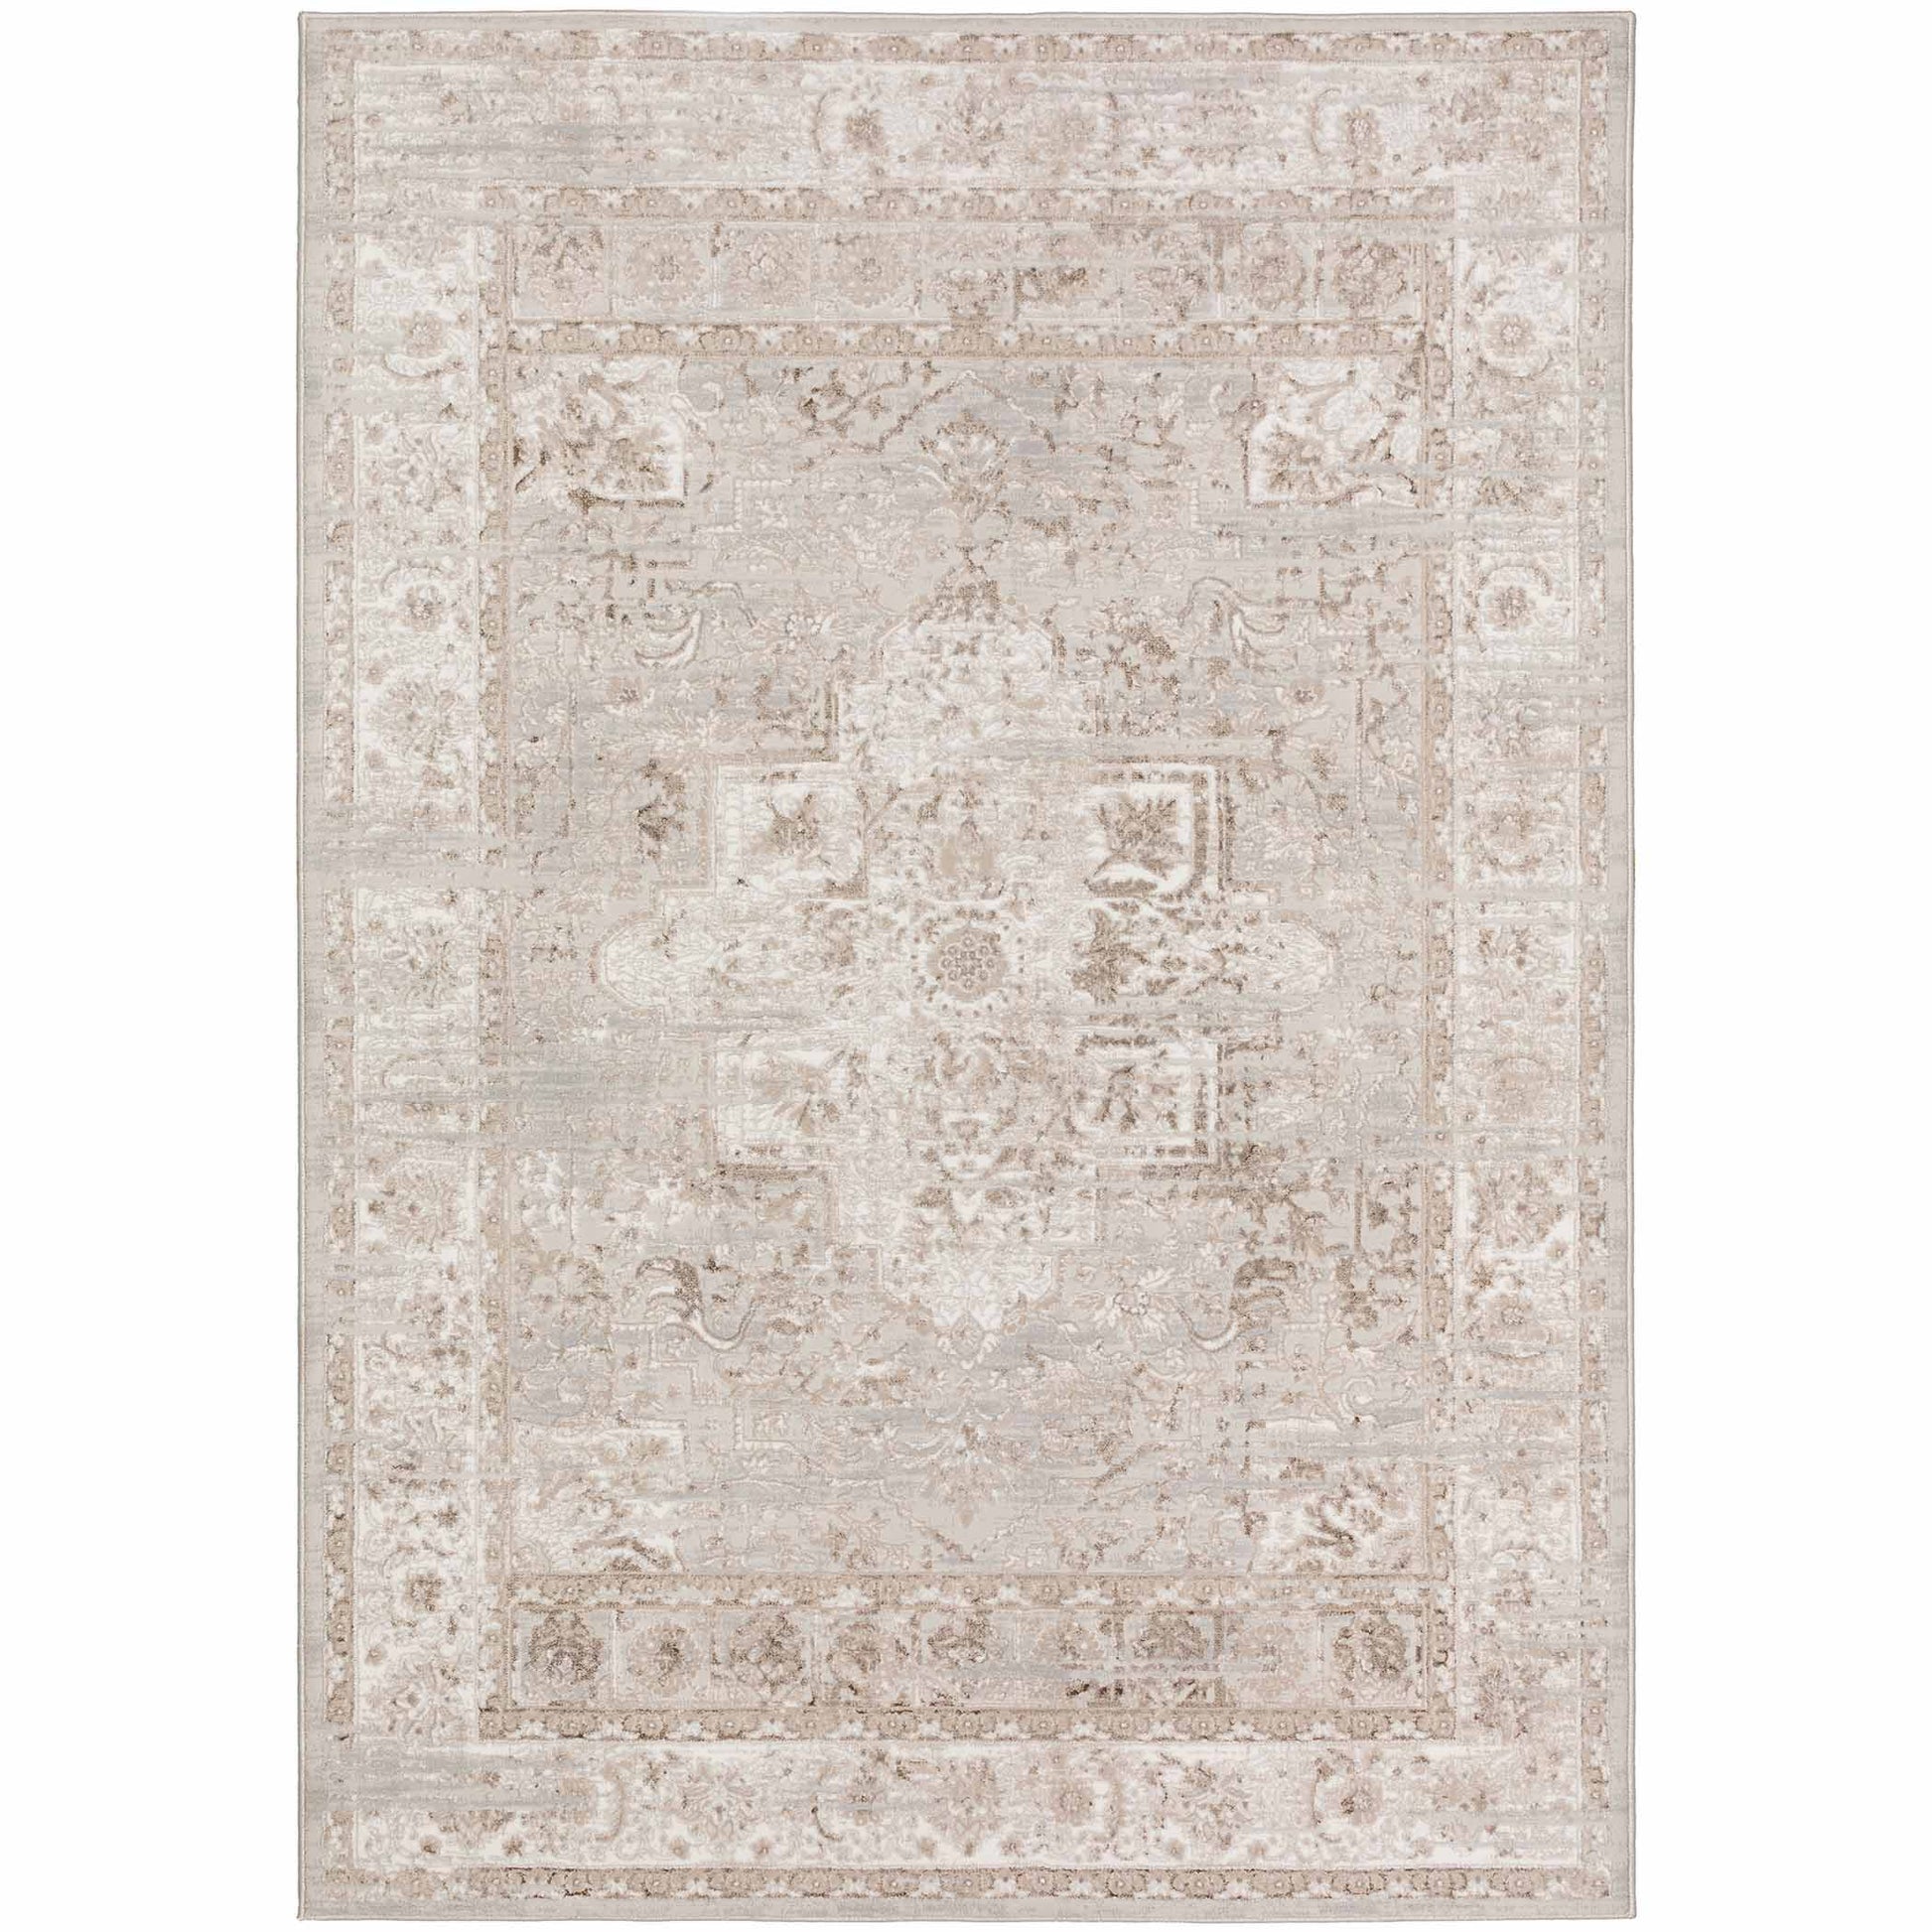 Dalyn Rugs Rhodes RR6 Taupe Transitional Power Woven Rug